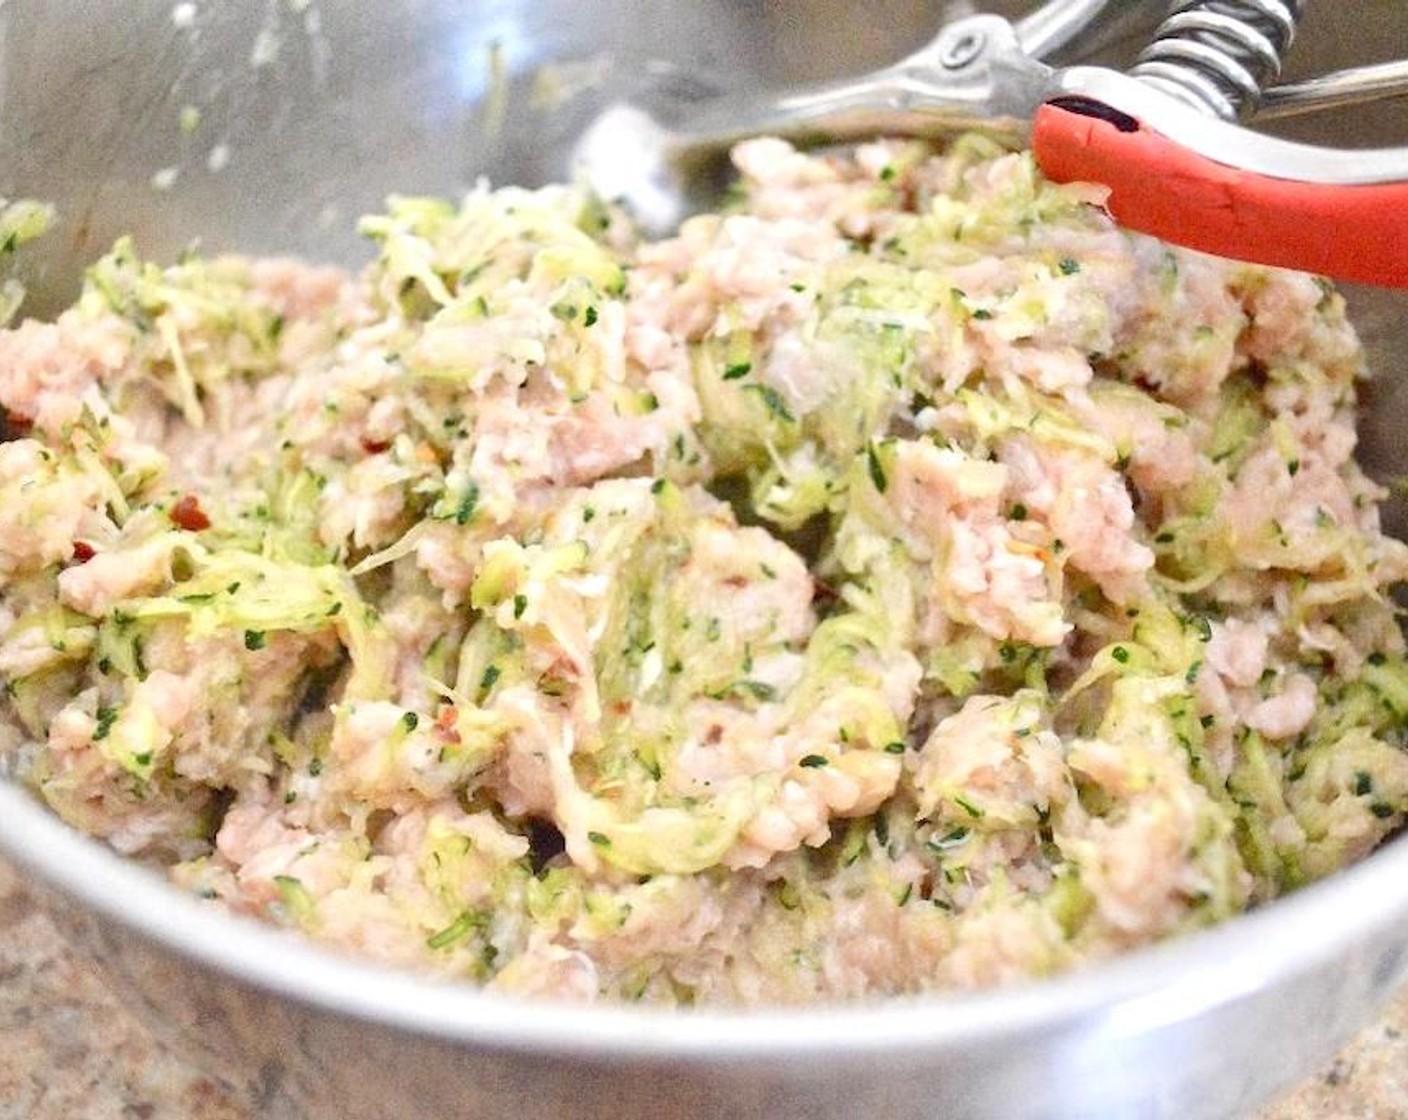 step 3 Combine zucchini, Ground Chicken (1 lb), Dijon Mustard (1 tsp), Salt (1/2 tsp), McCormick® Garlic Powder (1/2 tsp), Dried Onions (1/2 tsp), Dried Parsley (1/2 tsp), and Crushed Red Pepper Flakes (1/2 tsp) in a large bowl and stir it together thoroughly.